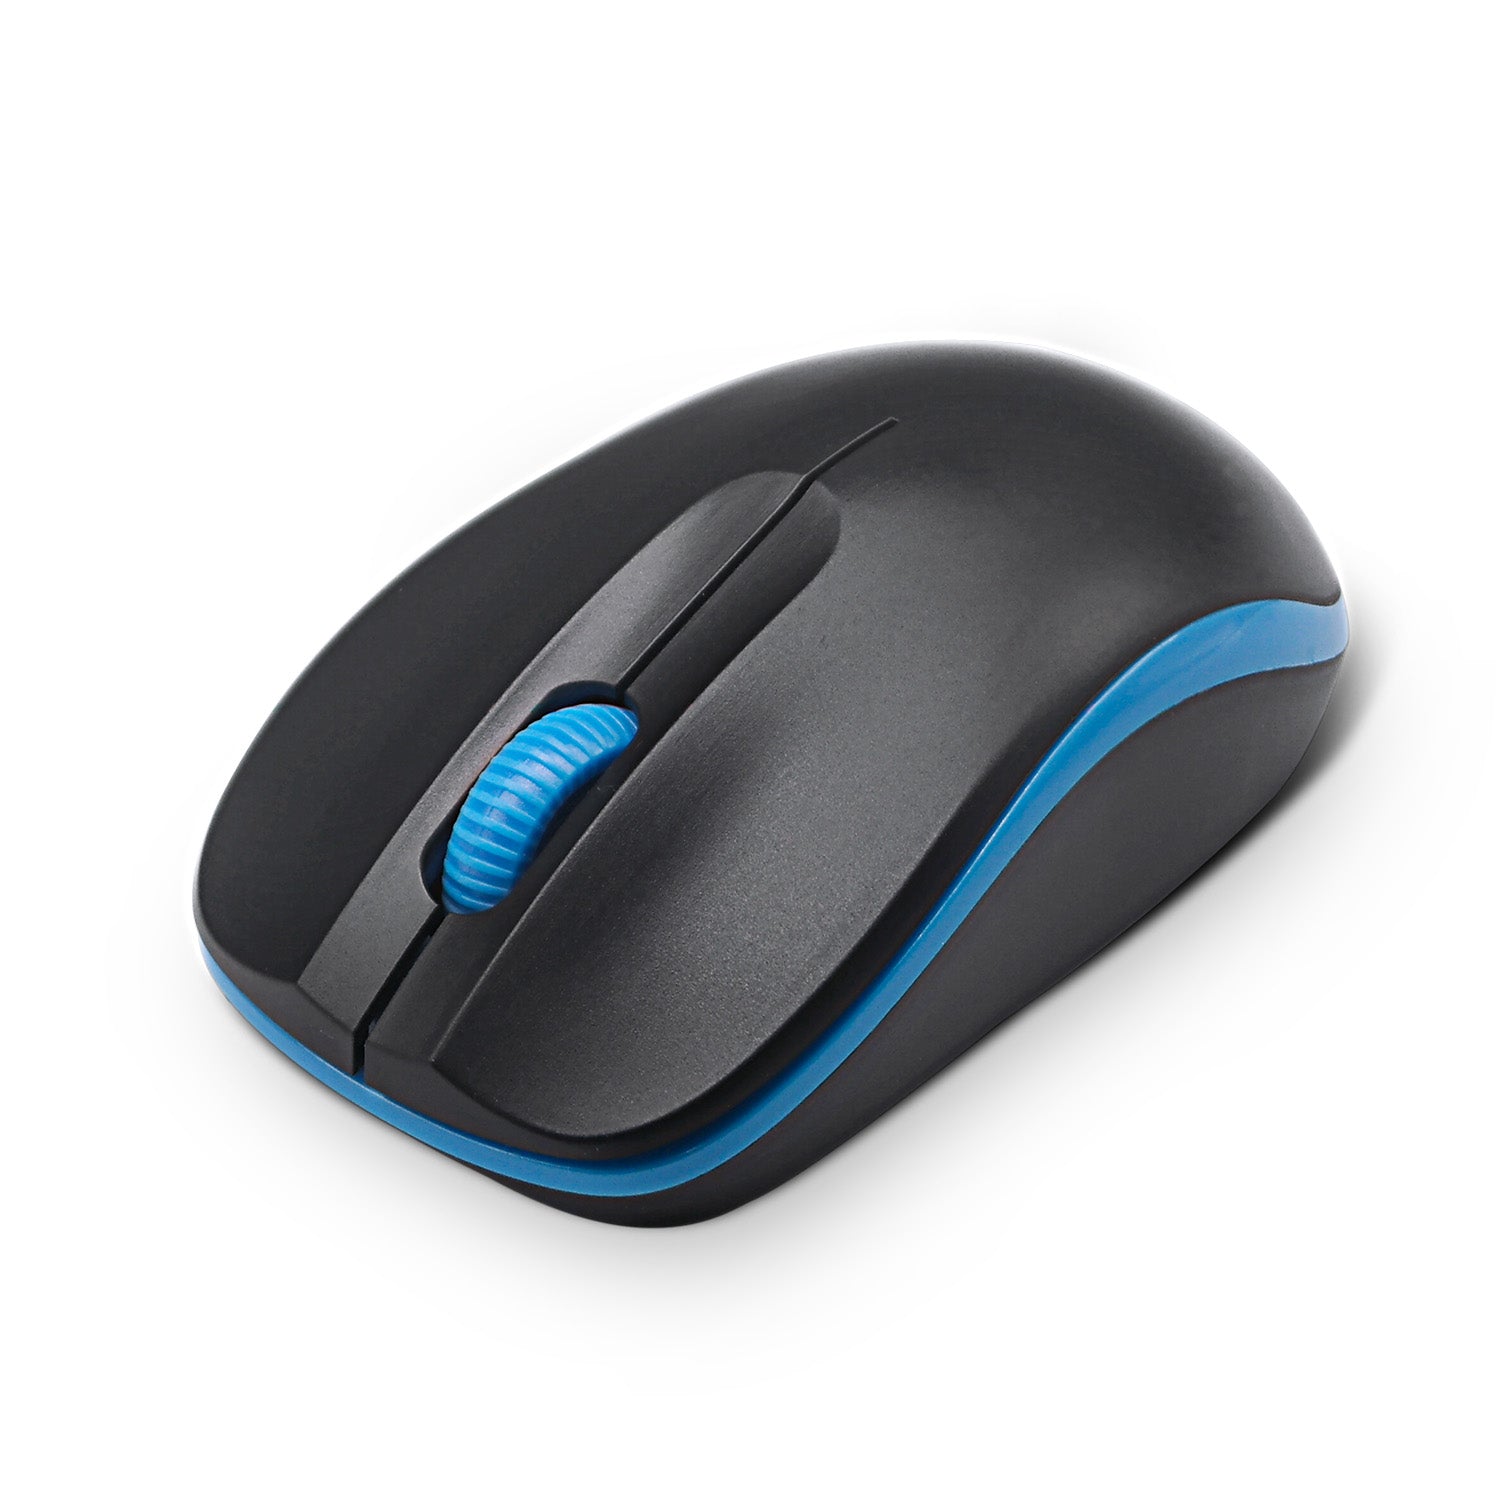 2.4 GHz Black / Blue Wireless Cordless Mouse Mice Optical Scroll For PC Laptop Computer + USB